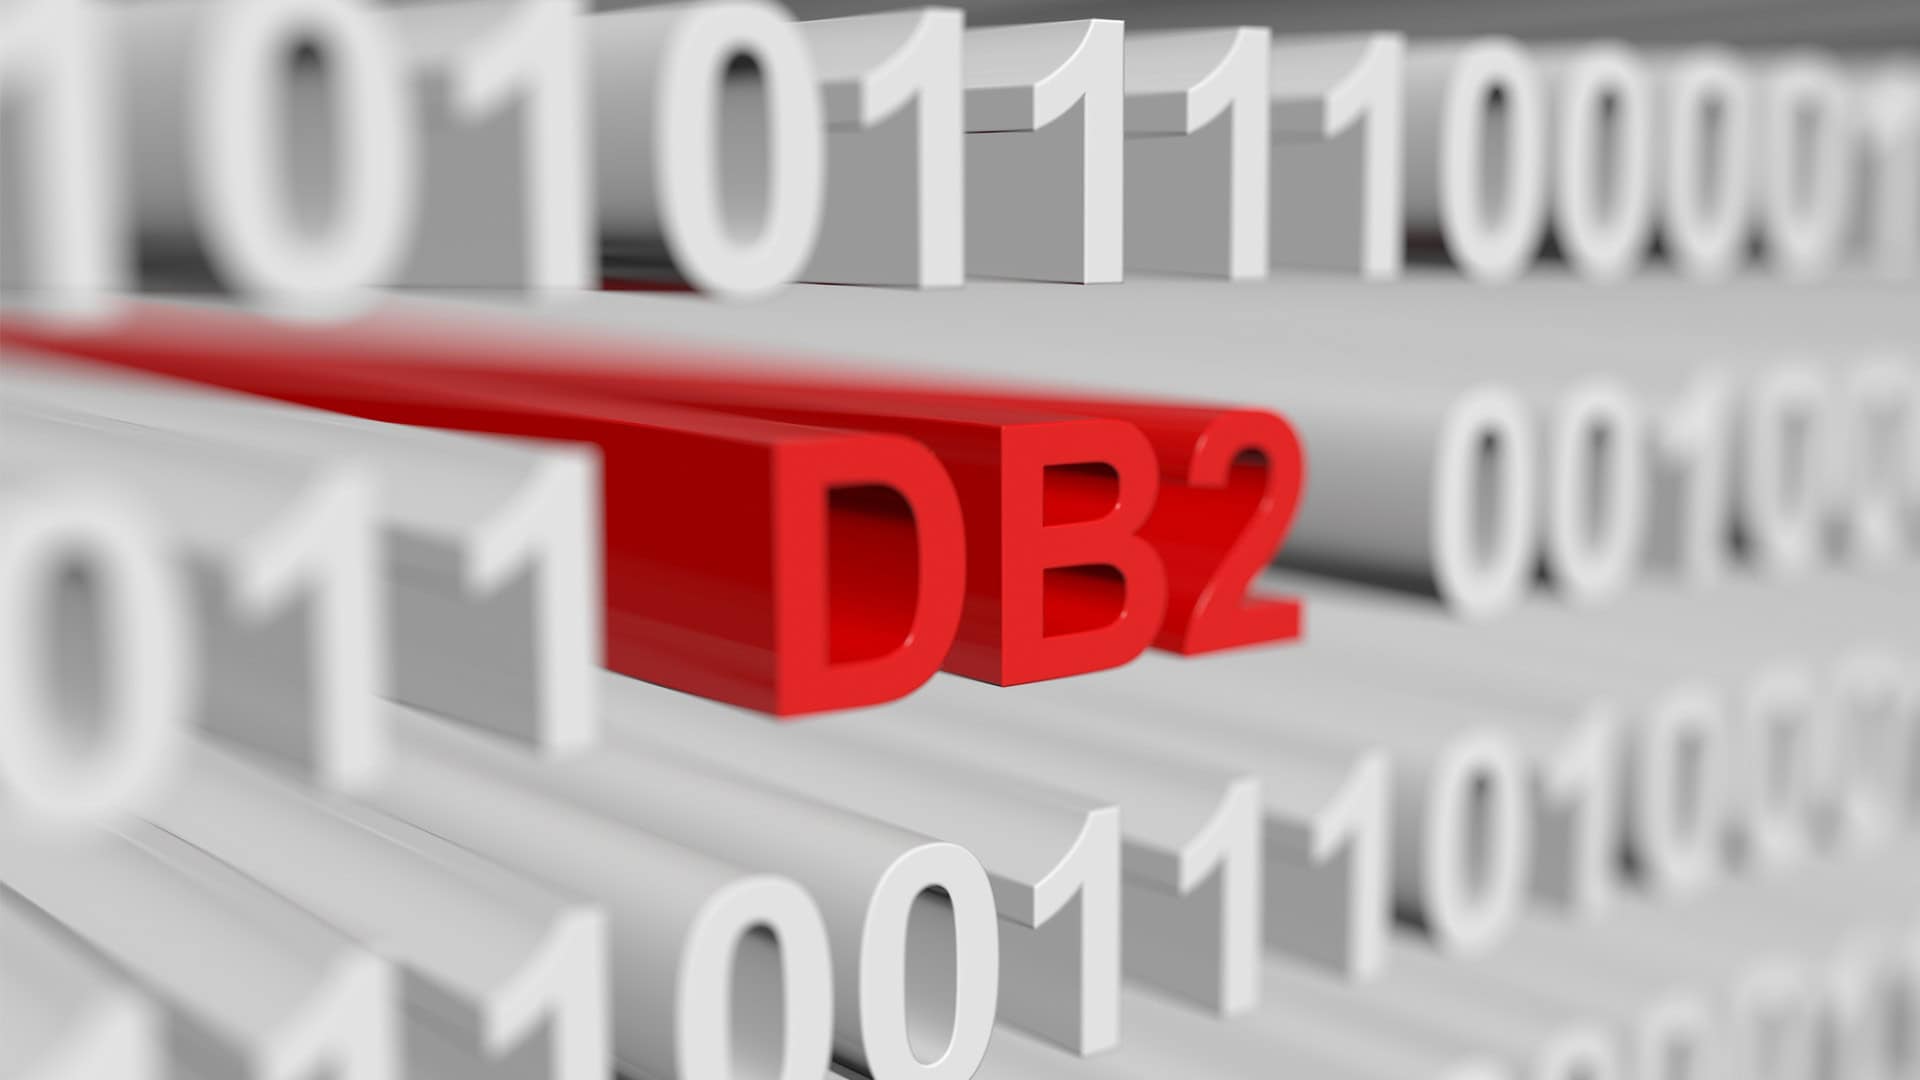 Prioritizing External DB2 Requests by User ID